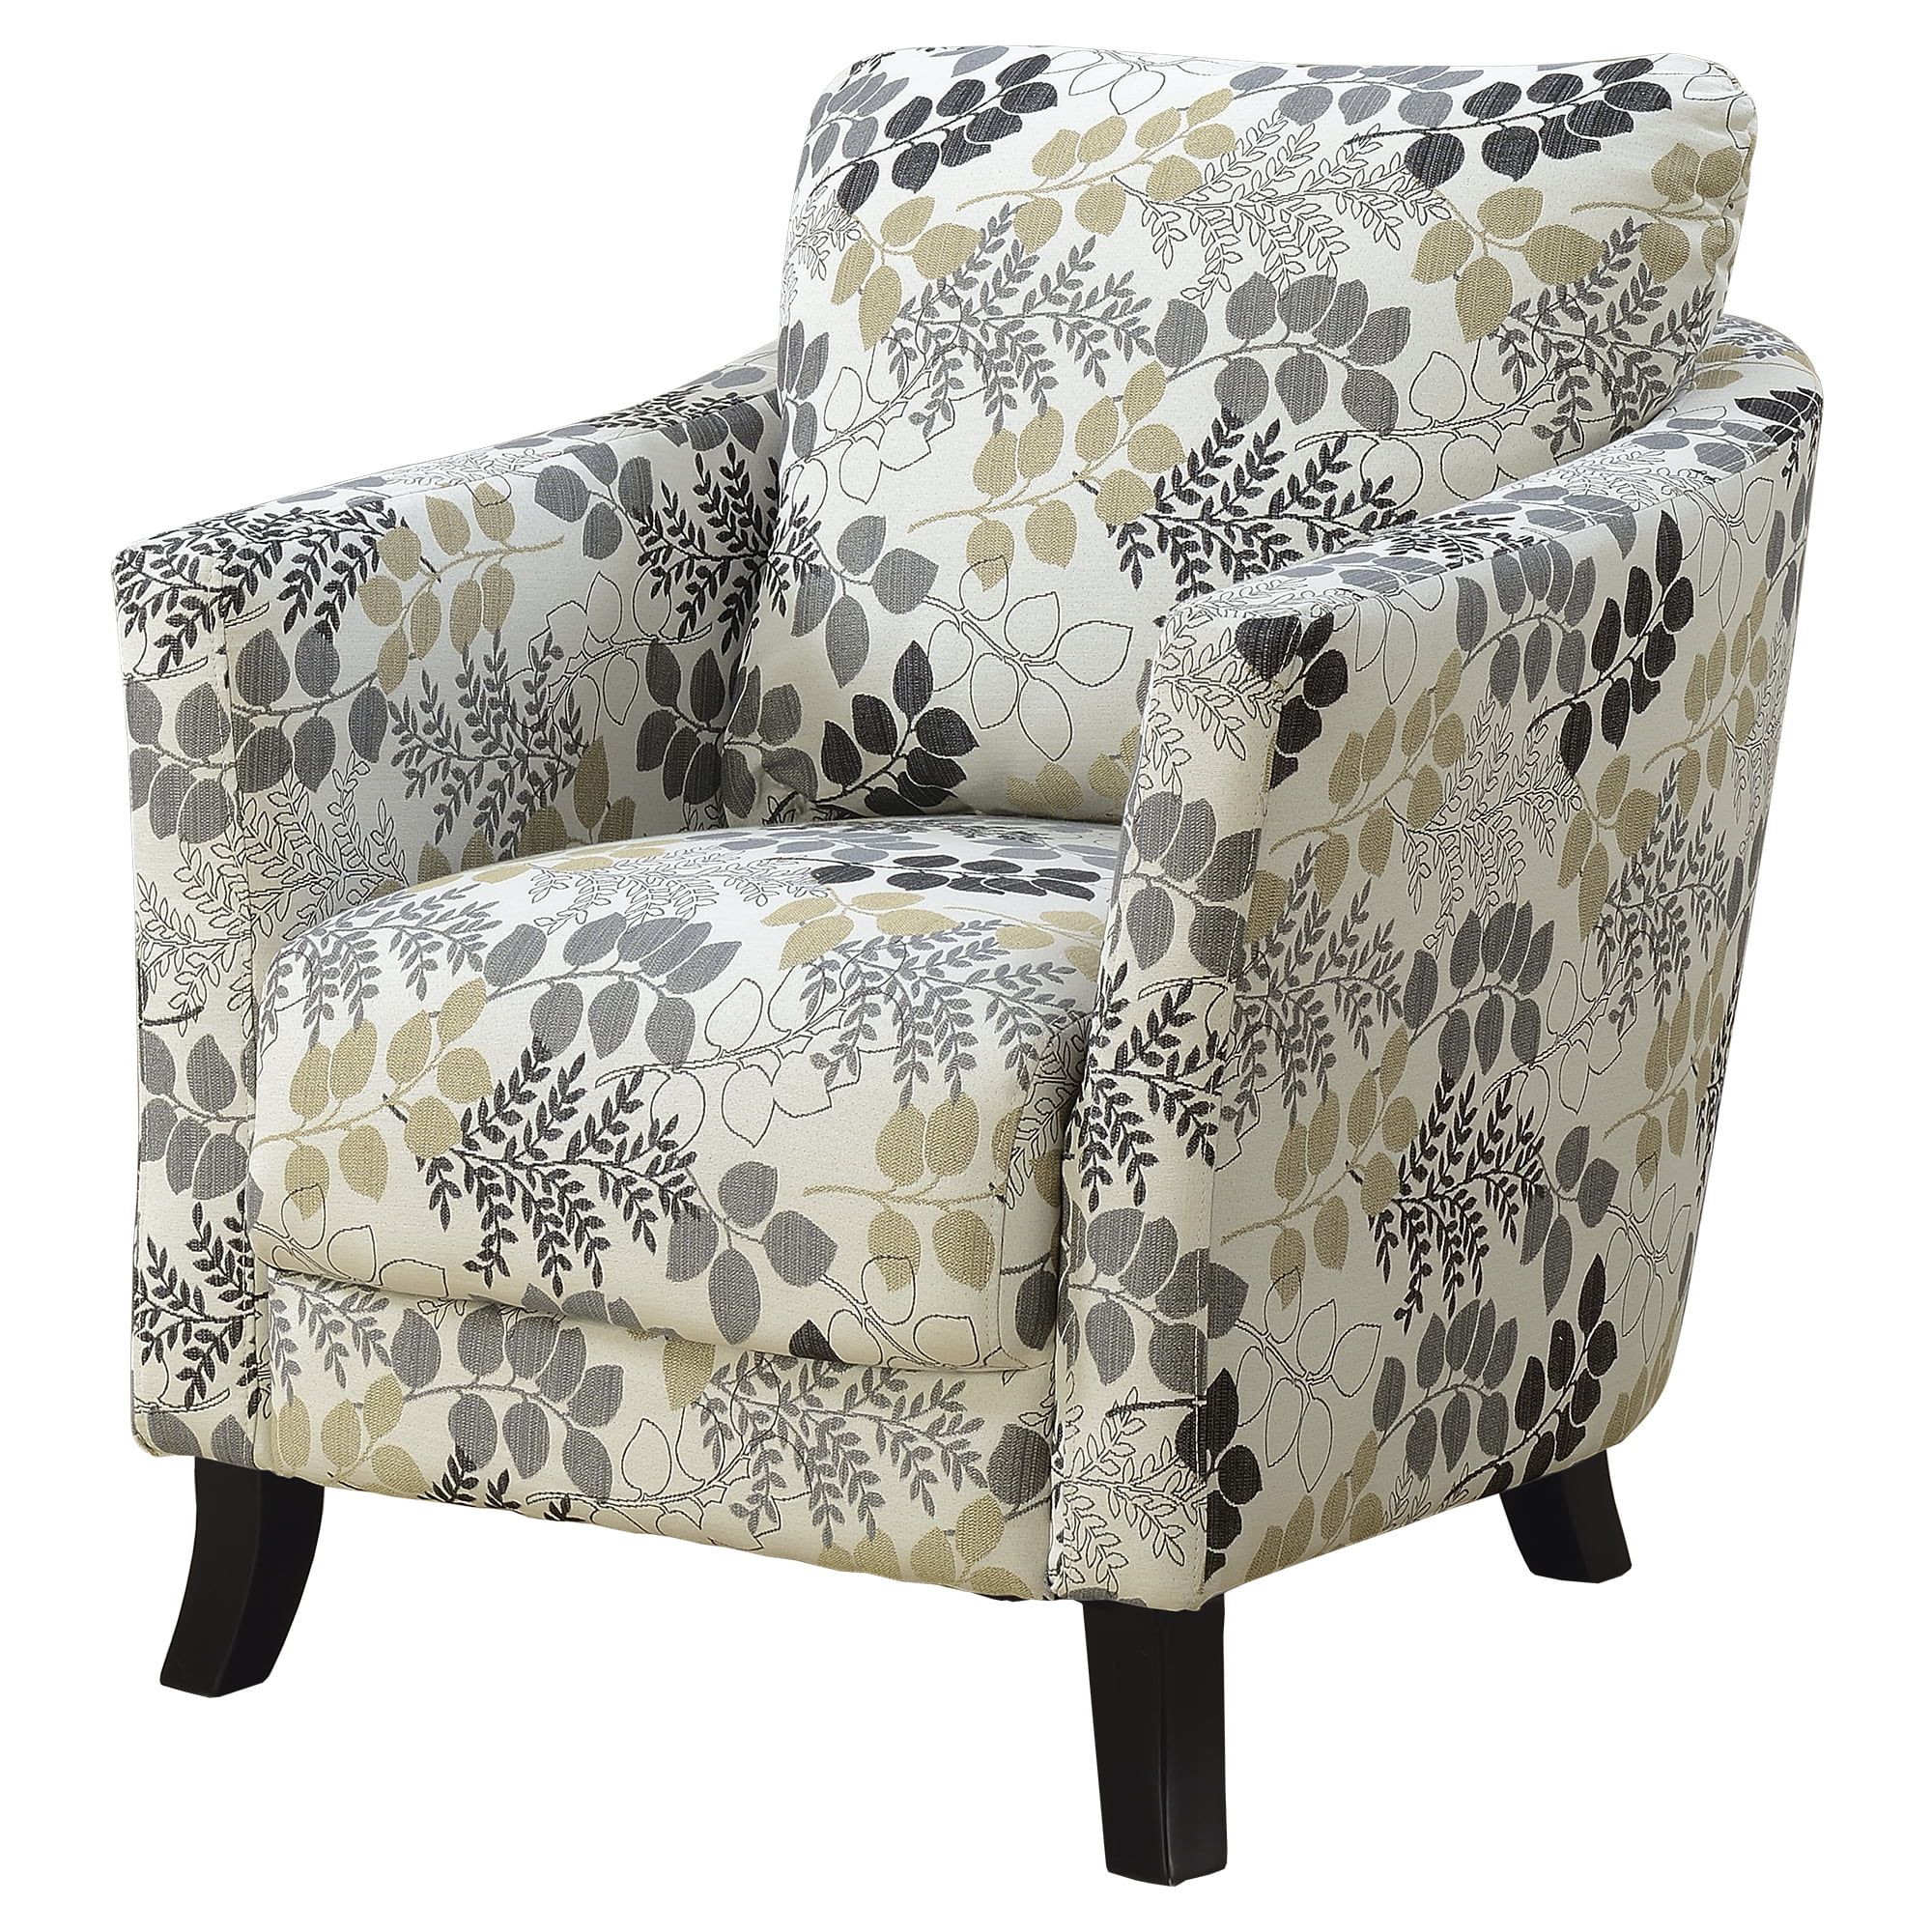 Most Recent 35" Gray And Beige Floral Contemporary Upholstered Accent Chair Pertaining To Smoke Gray Wood Accent Stools (View 9 of 10)